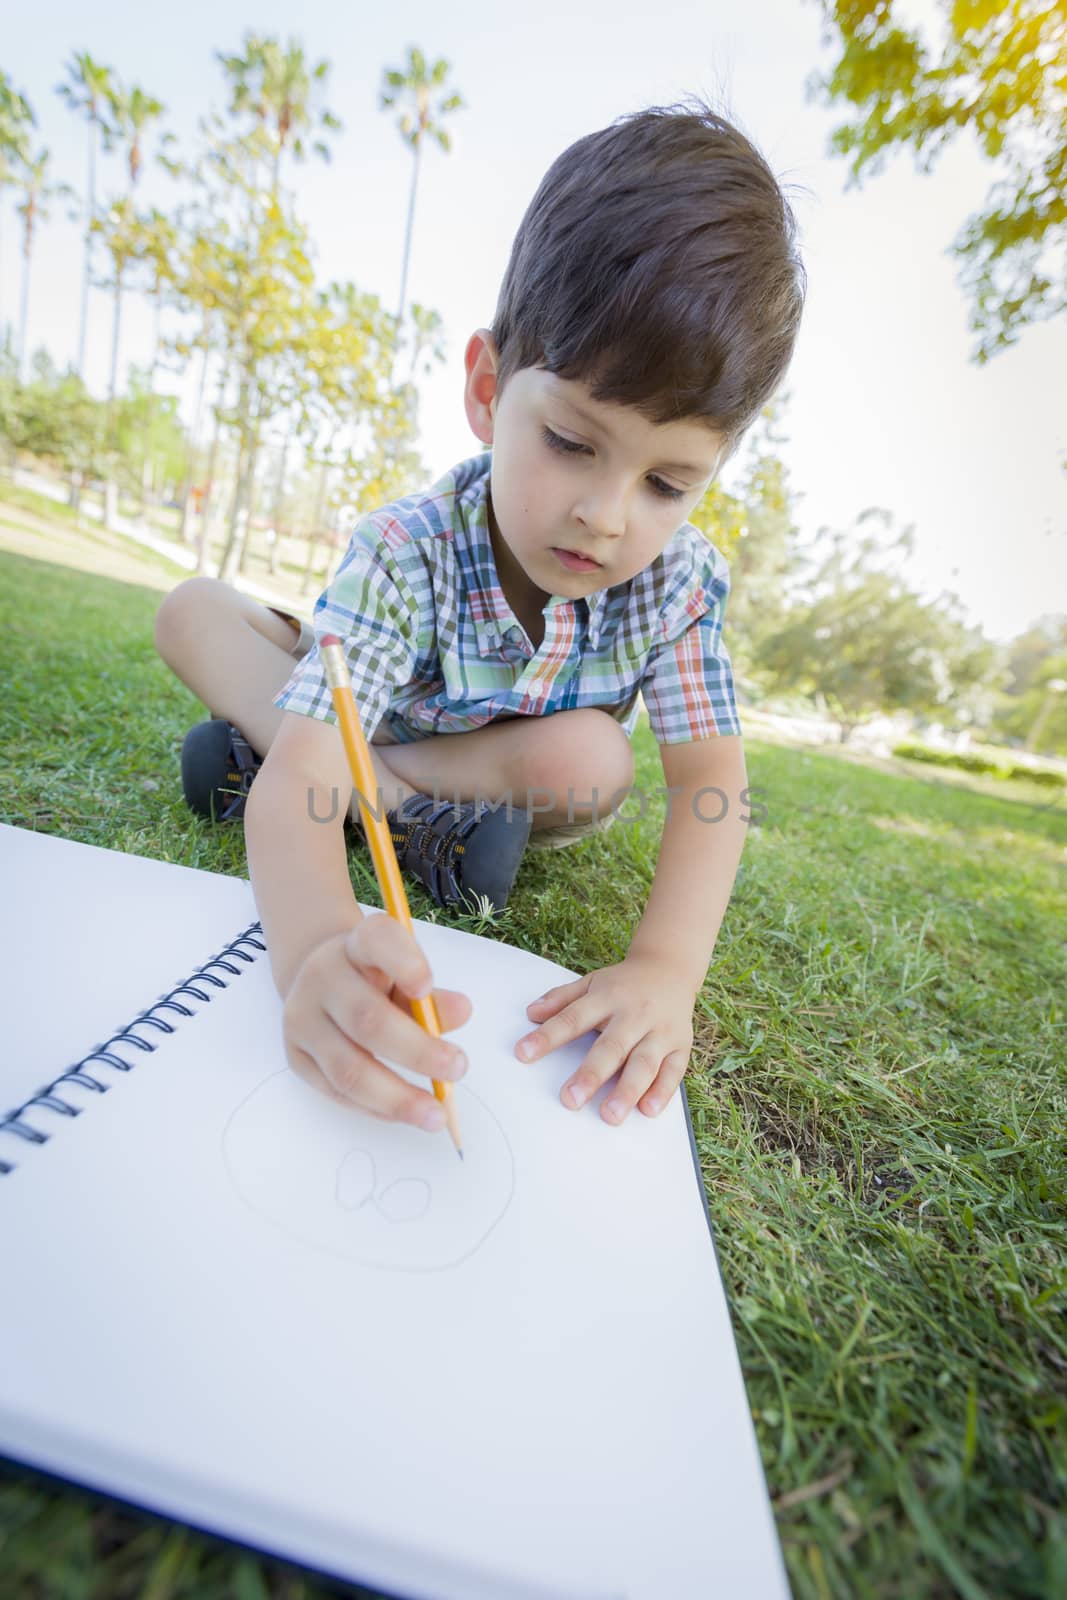 Cute Young Artistic Boy Drawing with Pencil and Paper Outdoors on the Grass